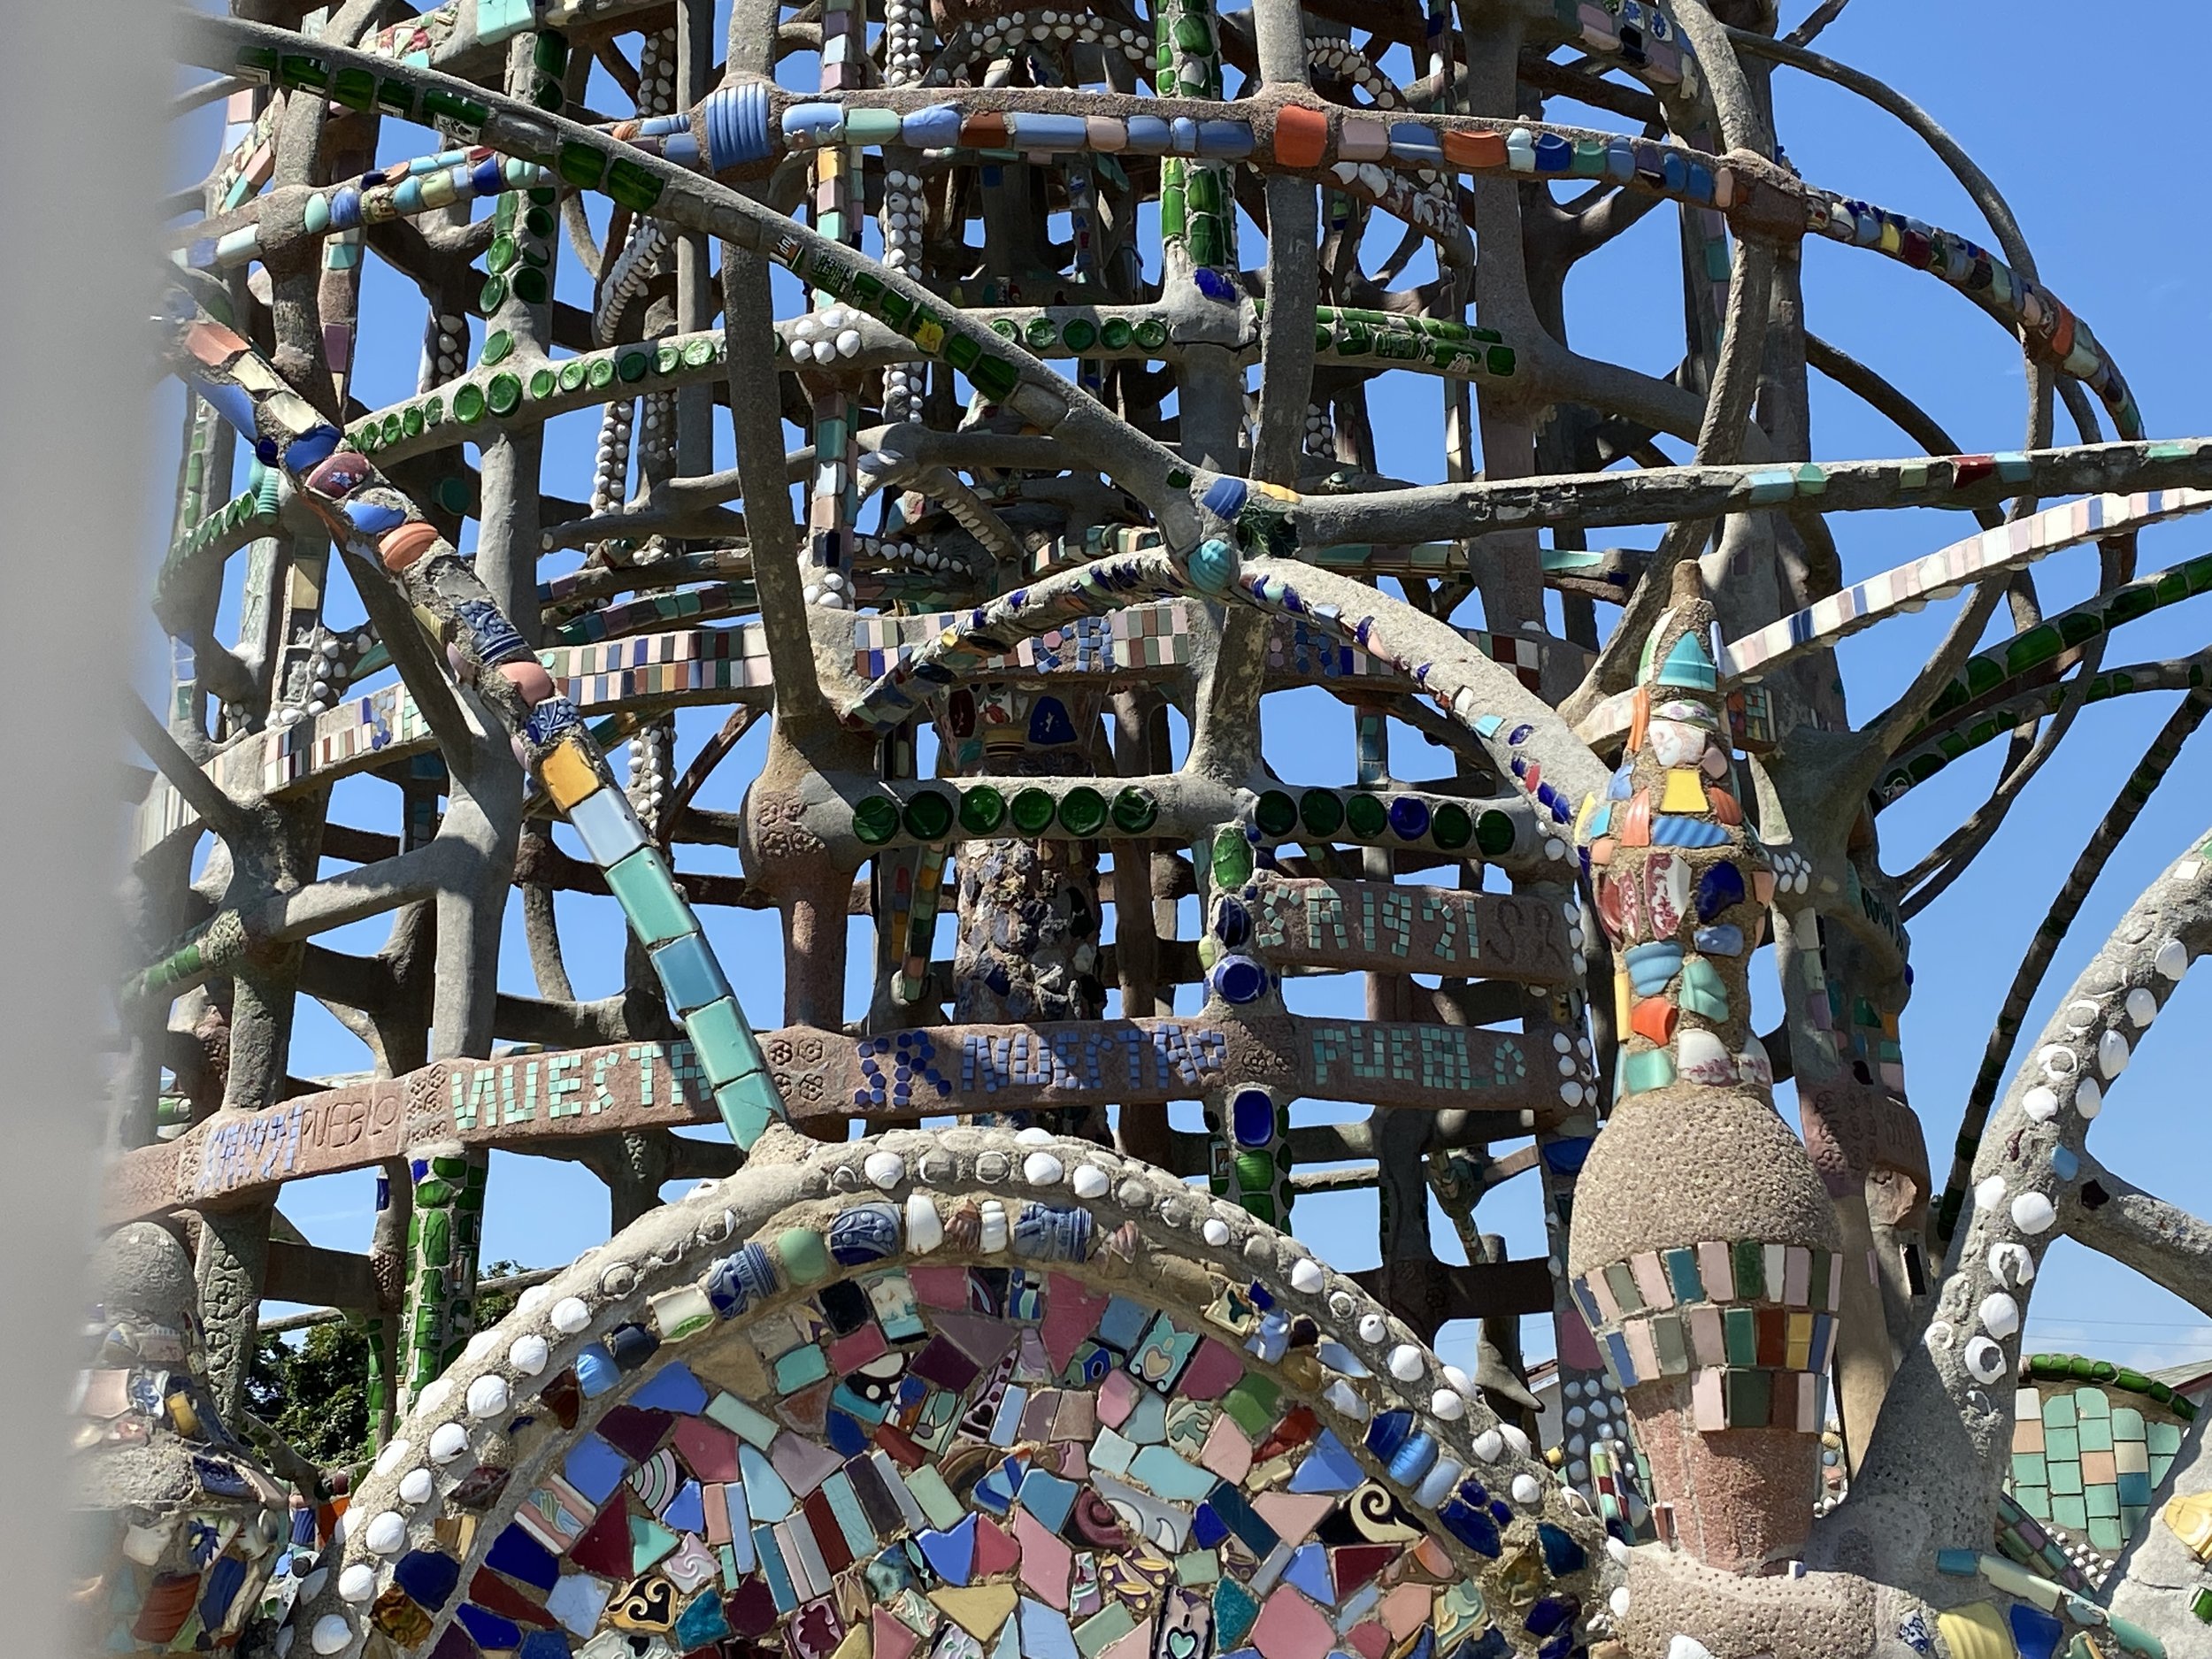 4. Nuestro Pueblo (The Watts Towers): Adorning Simon Rodia’s towers are approximately 100,000 fragments of seashells, glass bottles, ceramic tiles, clay pots, and other “found objects”